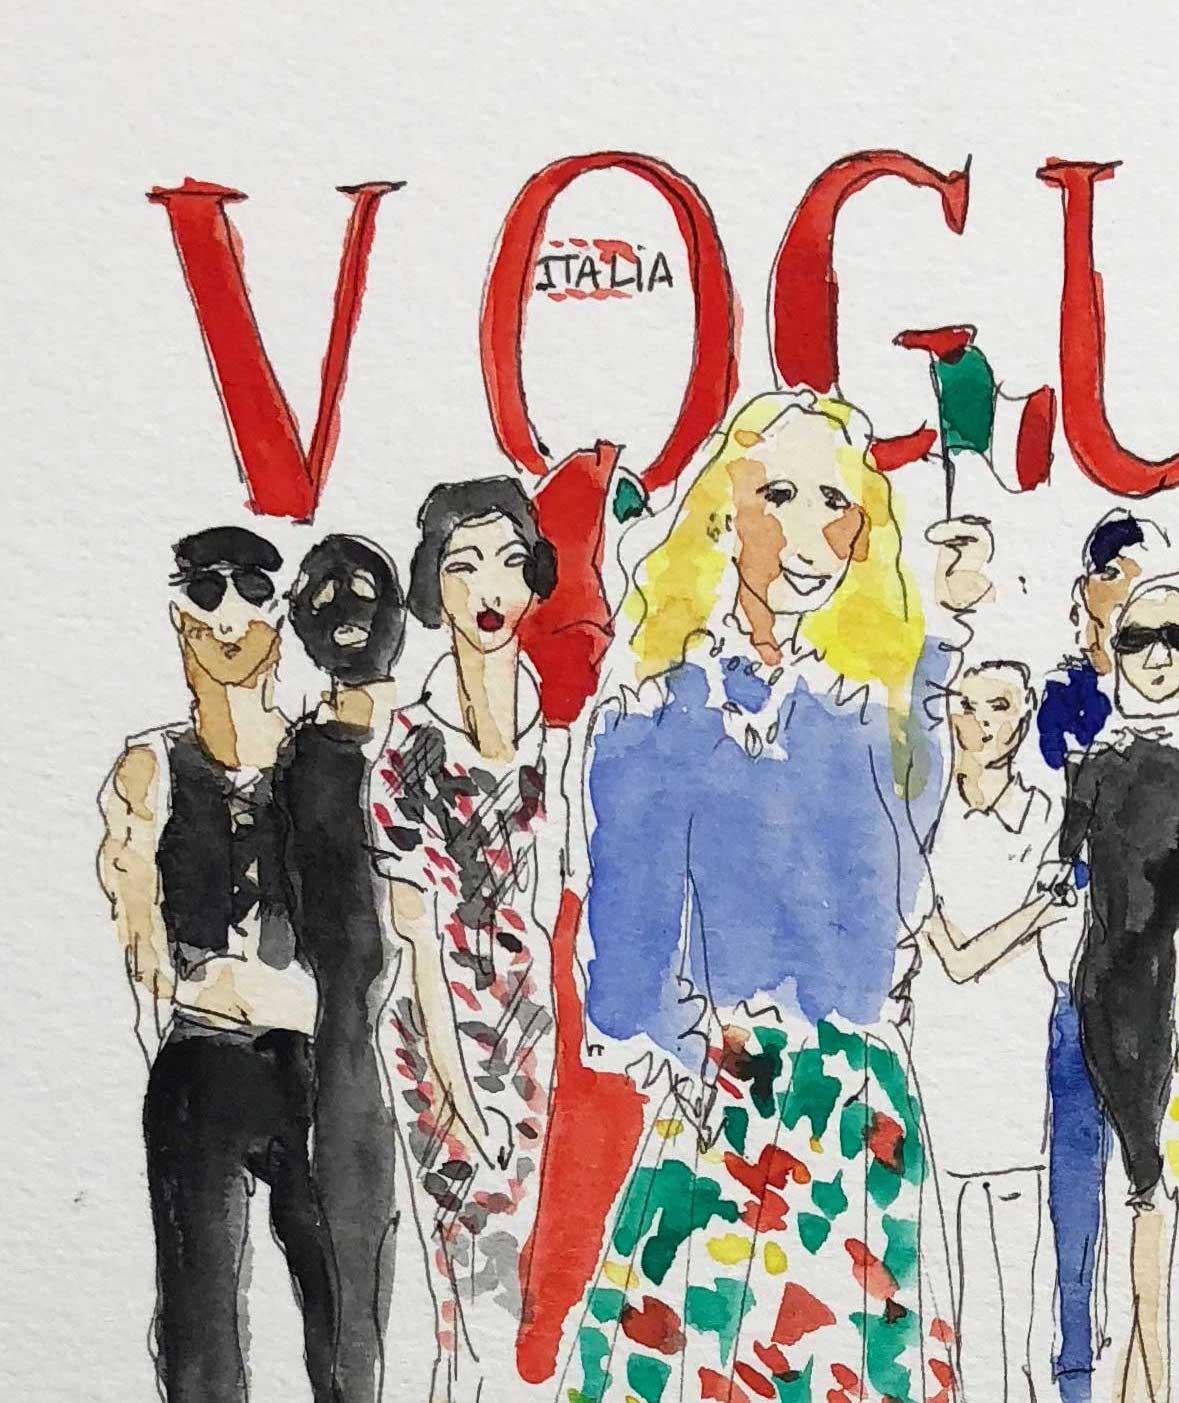 Franca Sozzani, Vogue Italia
Measures: 12 in. H x 9 in. W
Watercolor and archival paper
2016.

 Manuel Santelices explores the world of fashion, society and pop culture through his illustrations. A Chilean artist and journalist living and